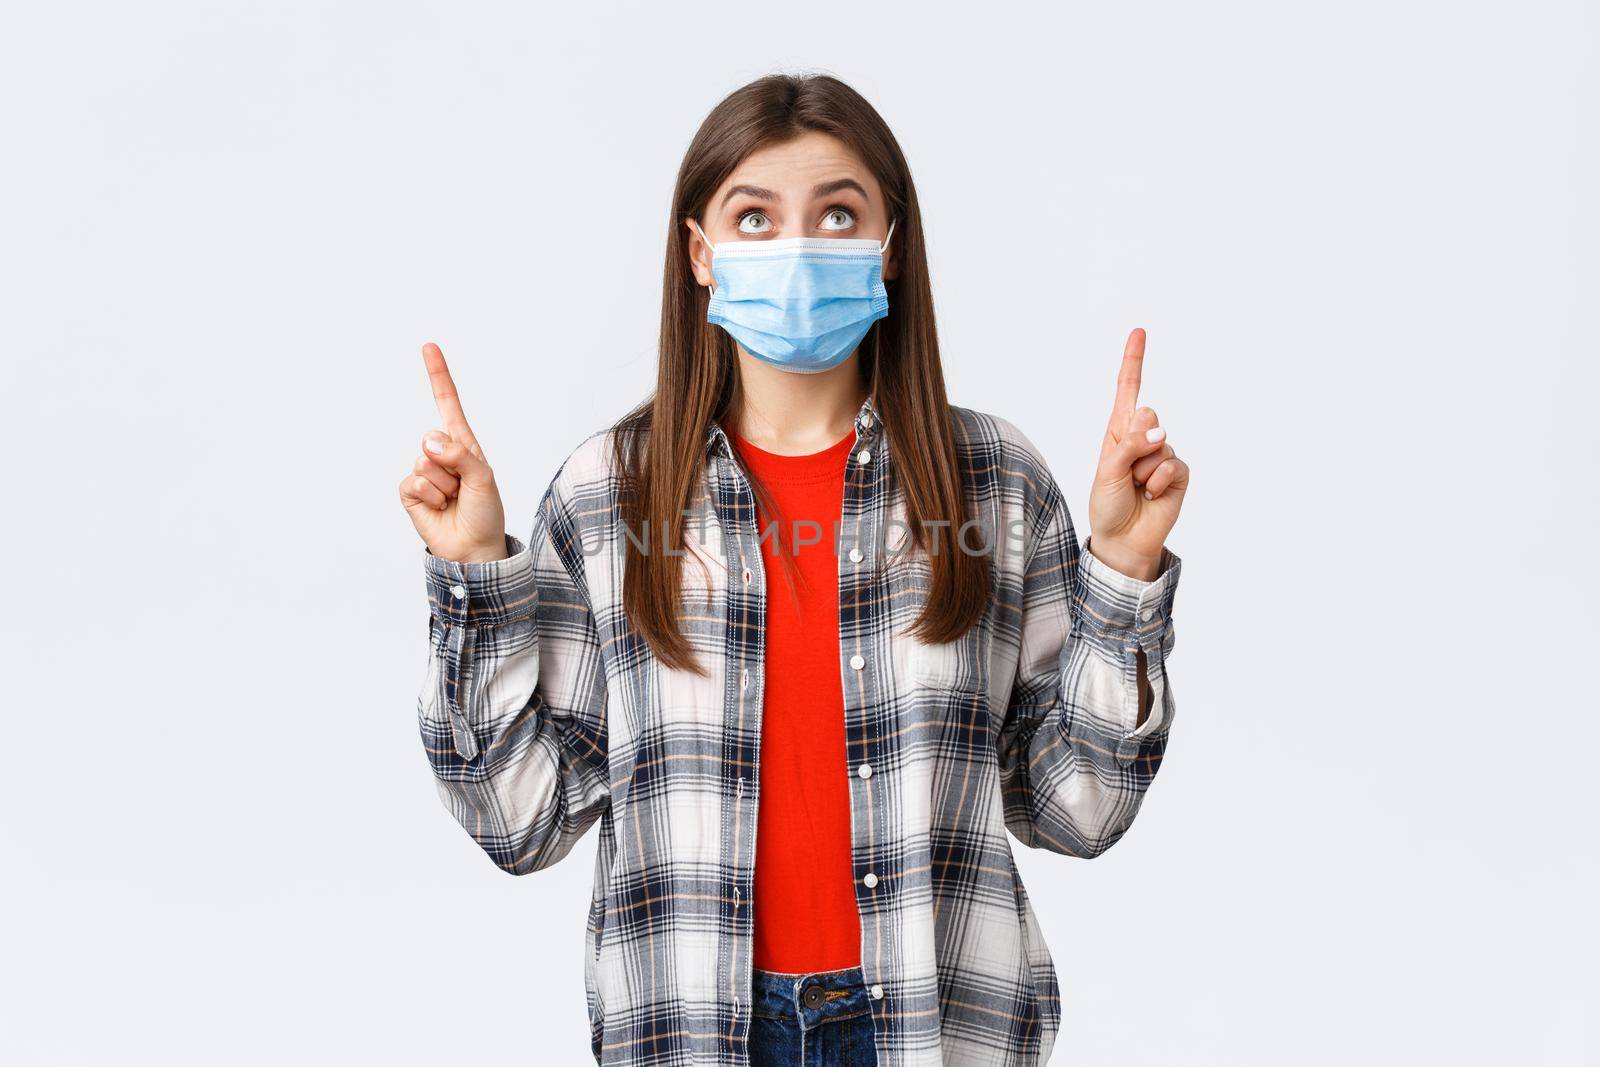 Coronavirus outbreak, leisure on quarantine, social distancing and emotions concept. Surprised and interested cute caucasian girl in casual outfit and medical mask, reading sign upwards, point up.